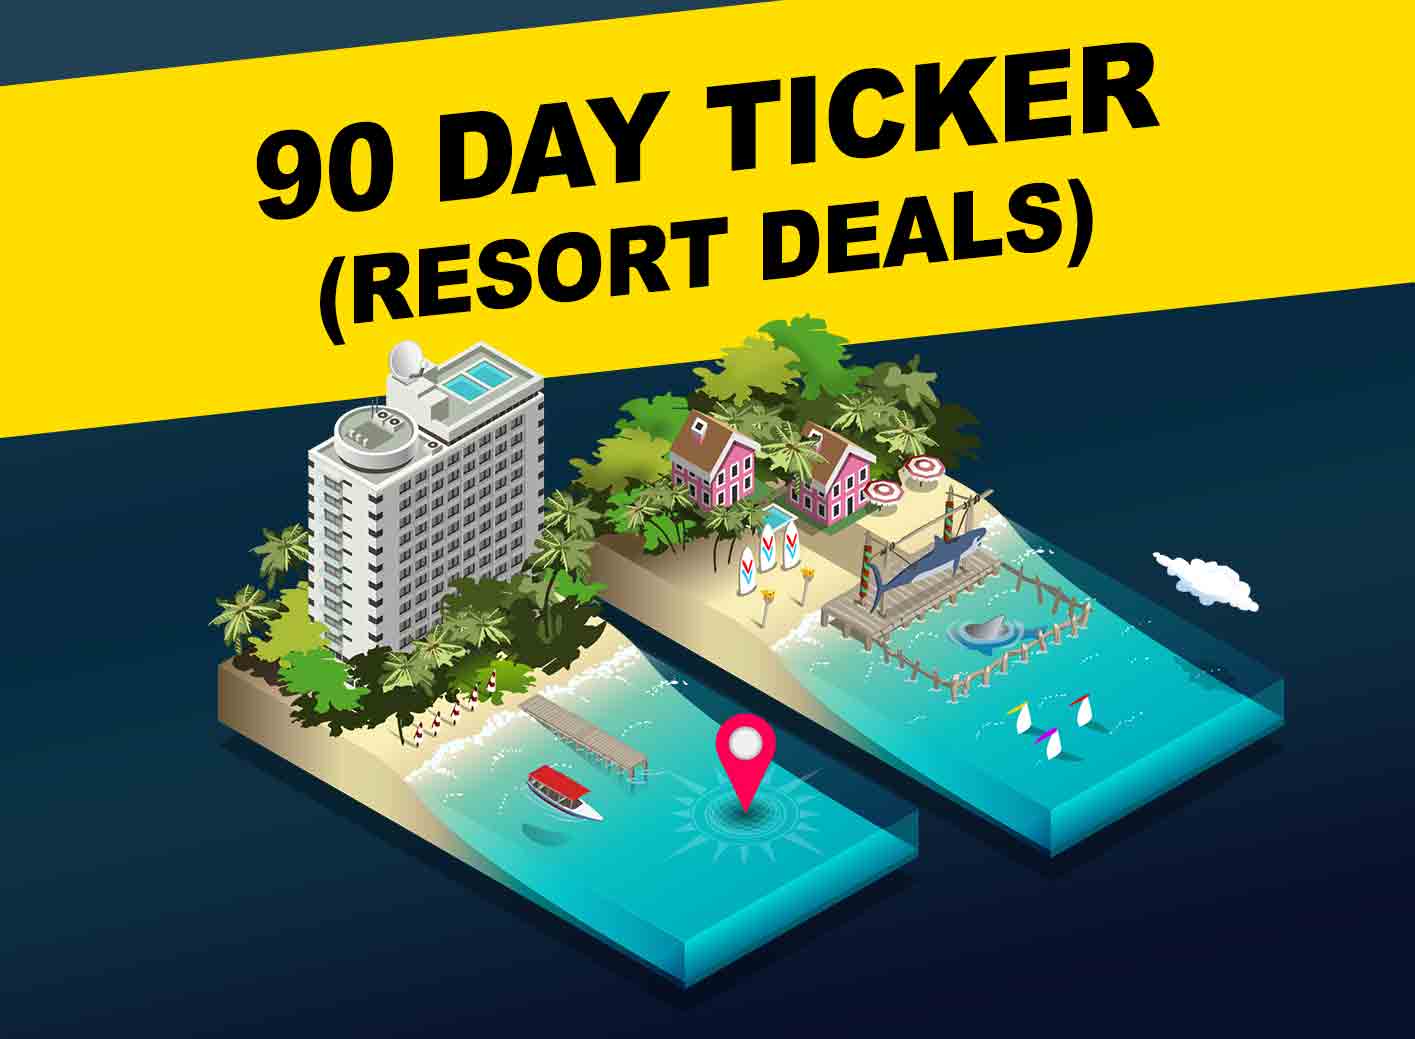 vacations to go cruises 90 day ticker